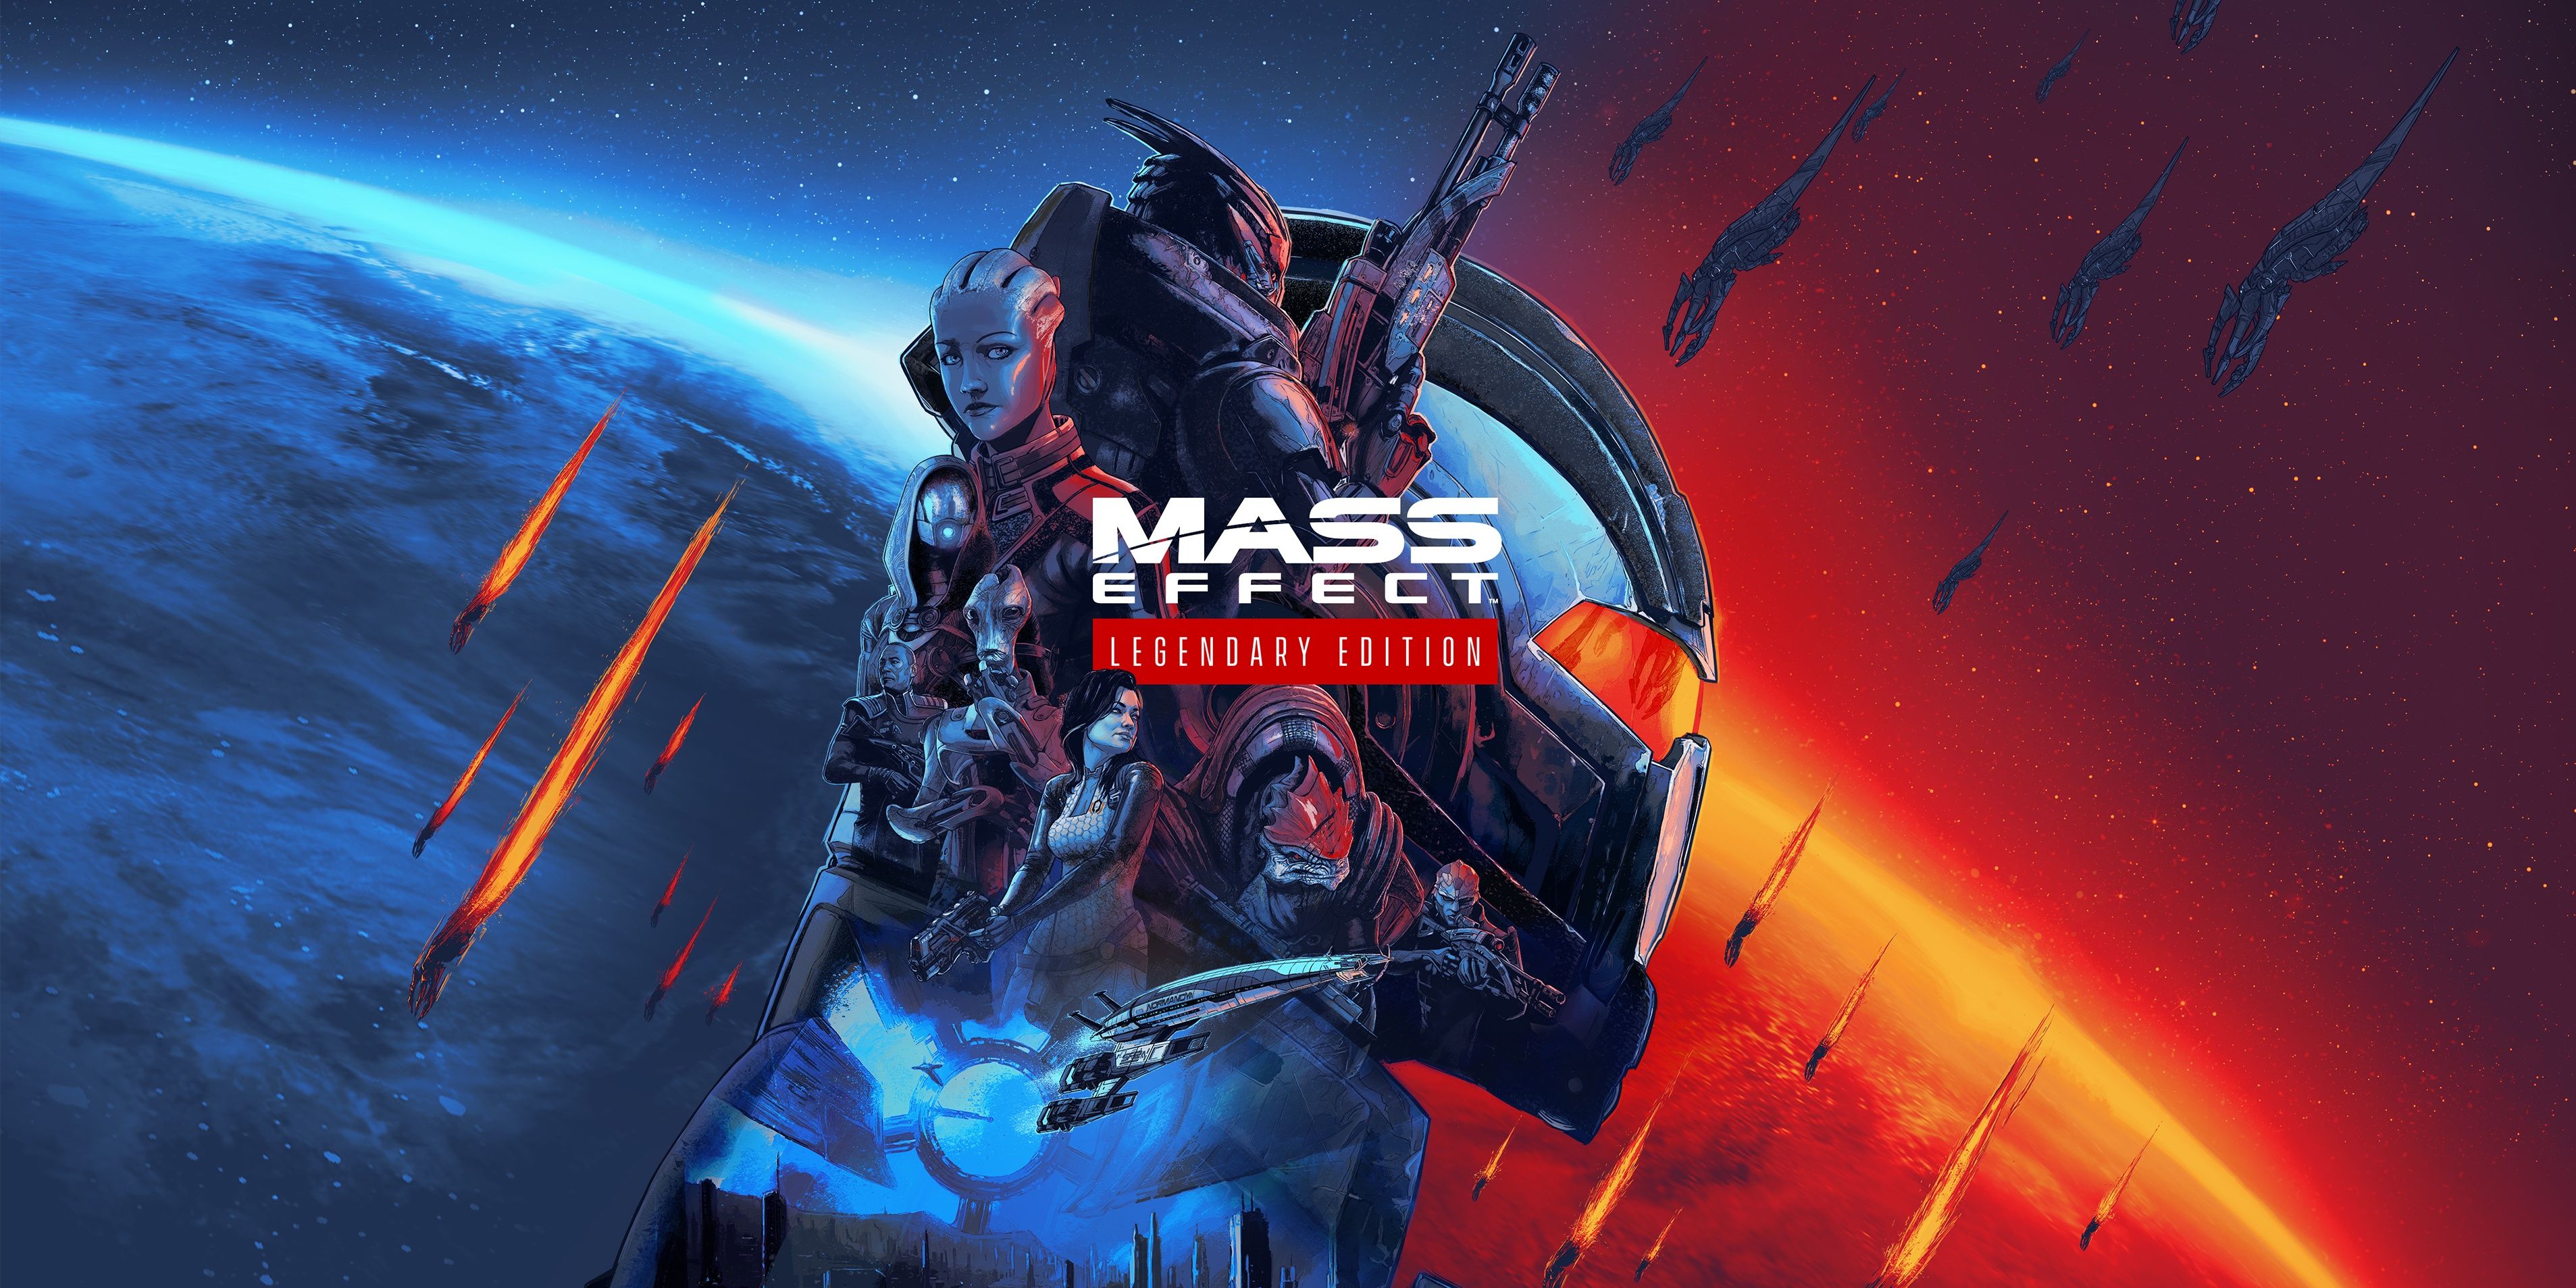 The poster of Mass Effect Legendary Edition featuring the main characters and Commander Shepard's helmet